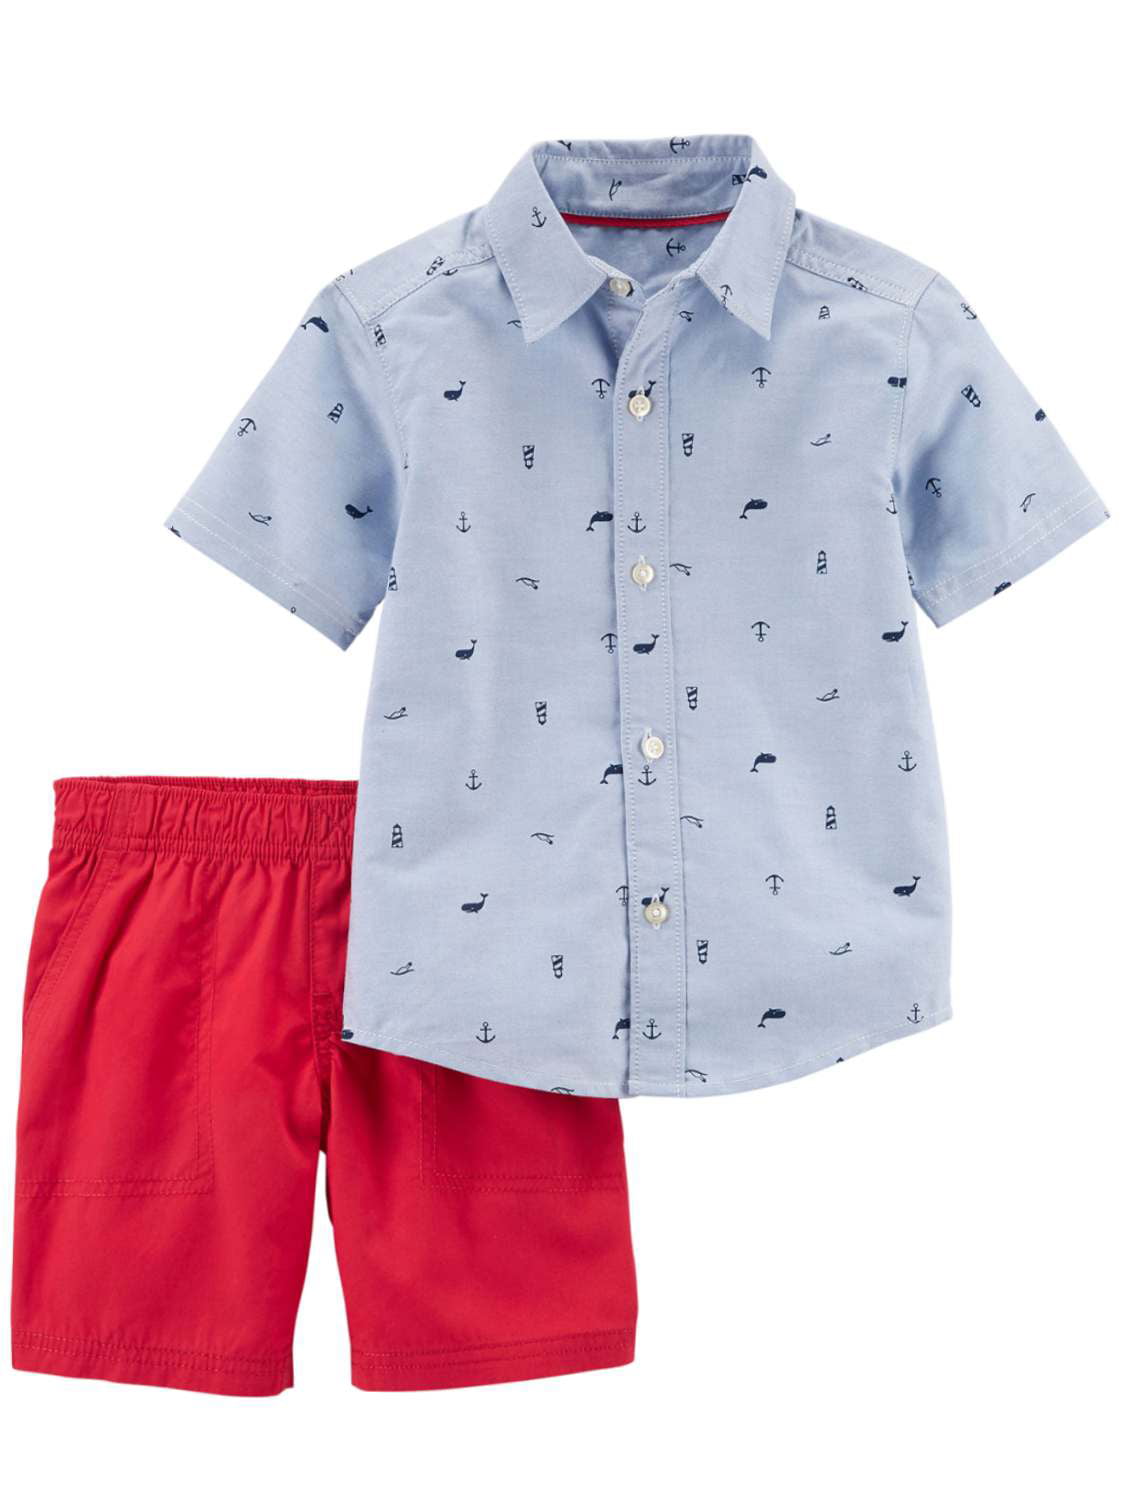 Carter's Carters Infant Boys Blue Whale & Anchor Baby Outfit Shirt & Coral Shorts Set